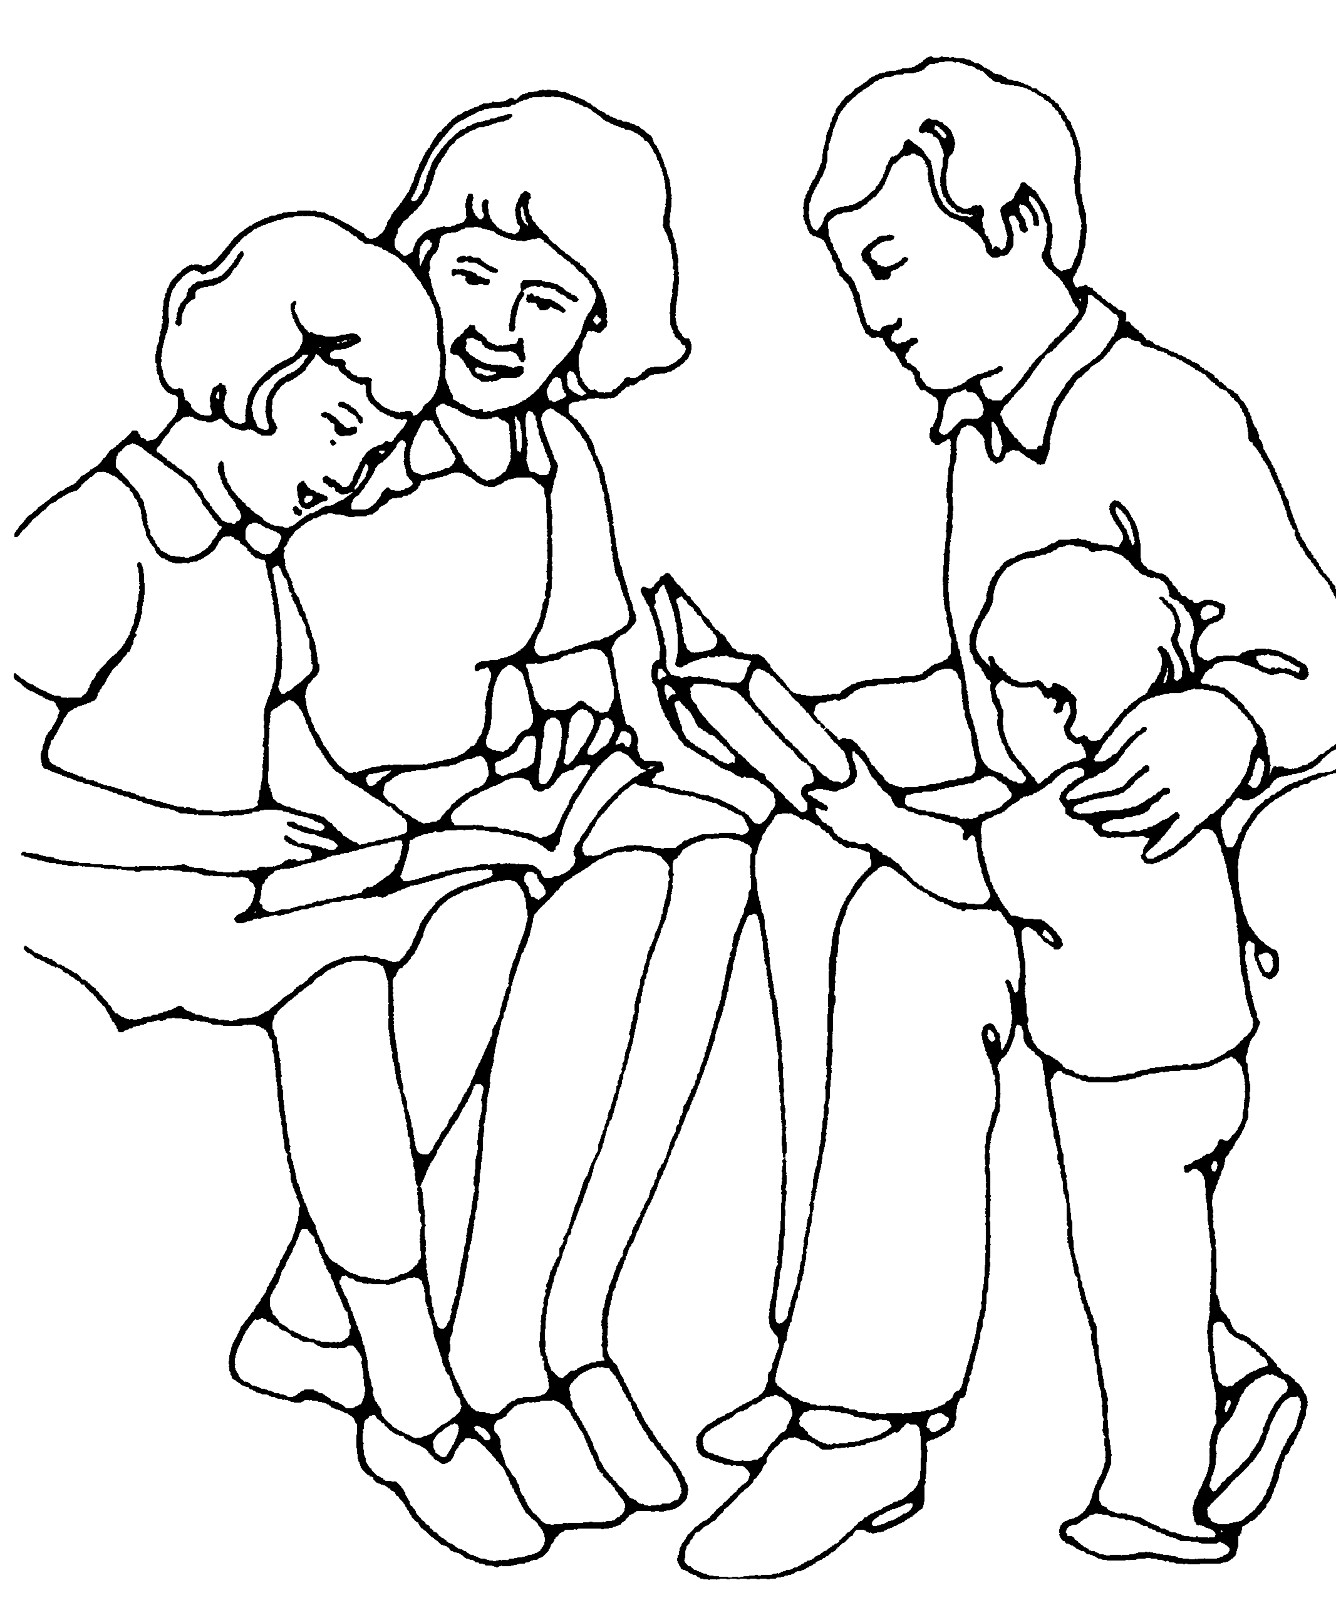 Boys Reading The Bible Coloring Pages
 Family Scripture Reading